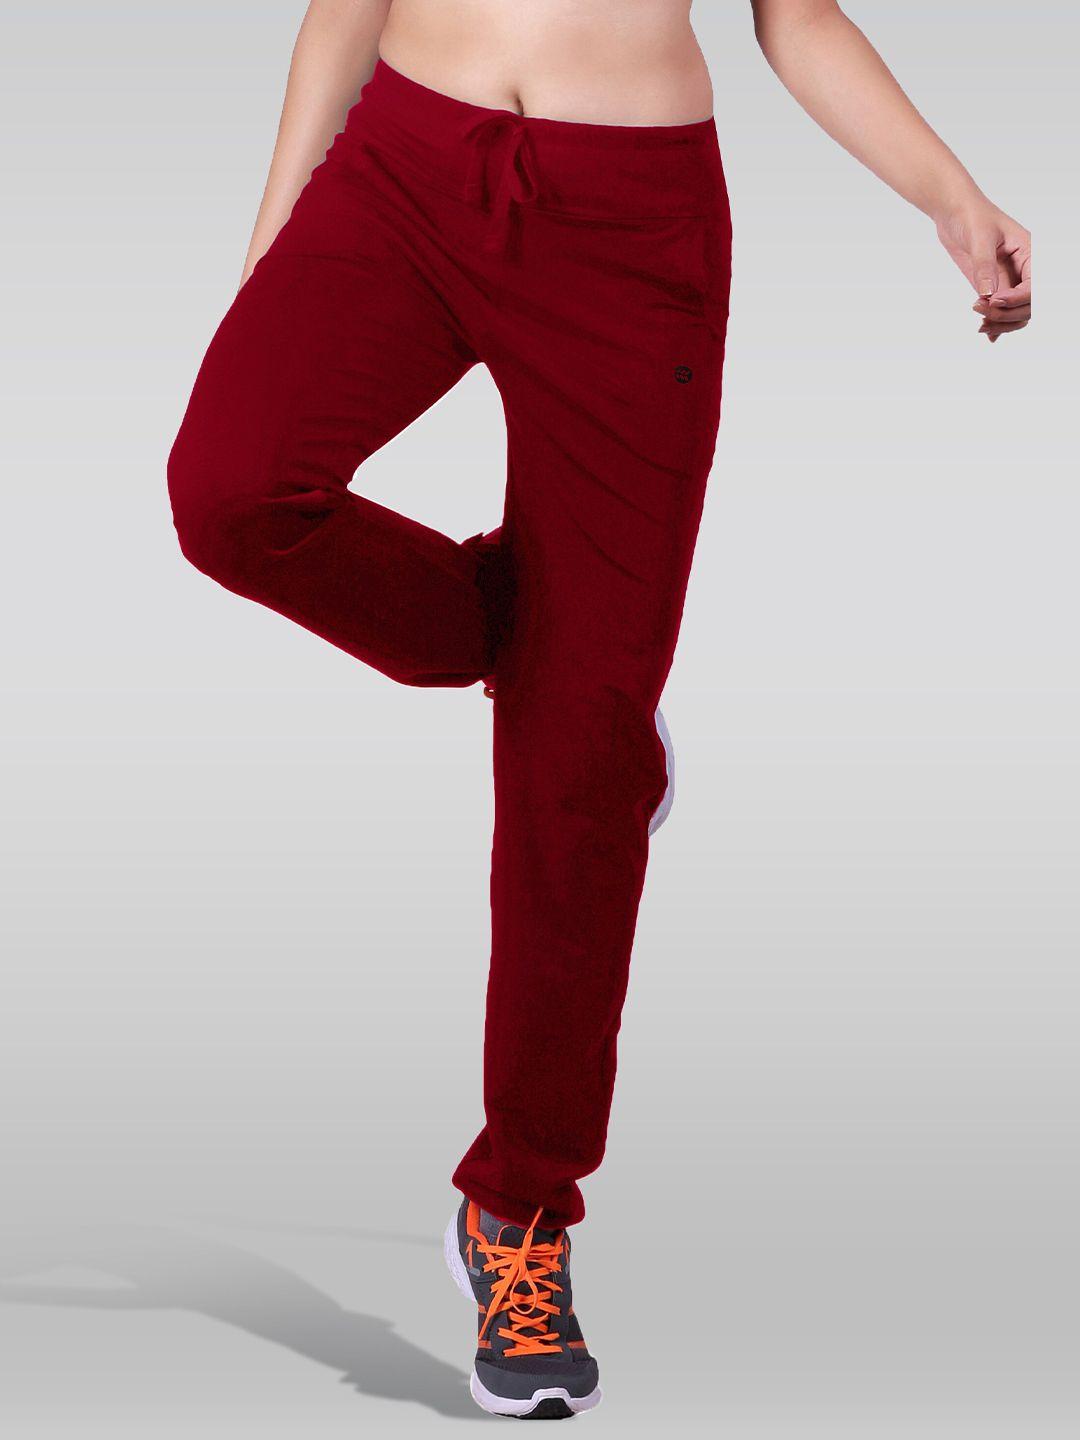 laasa--sports-women-printed-cotton-dry-fit-track-pants